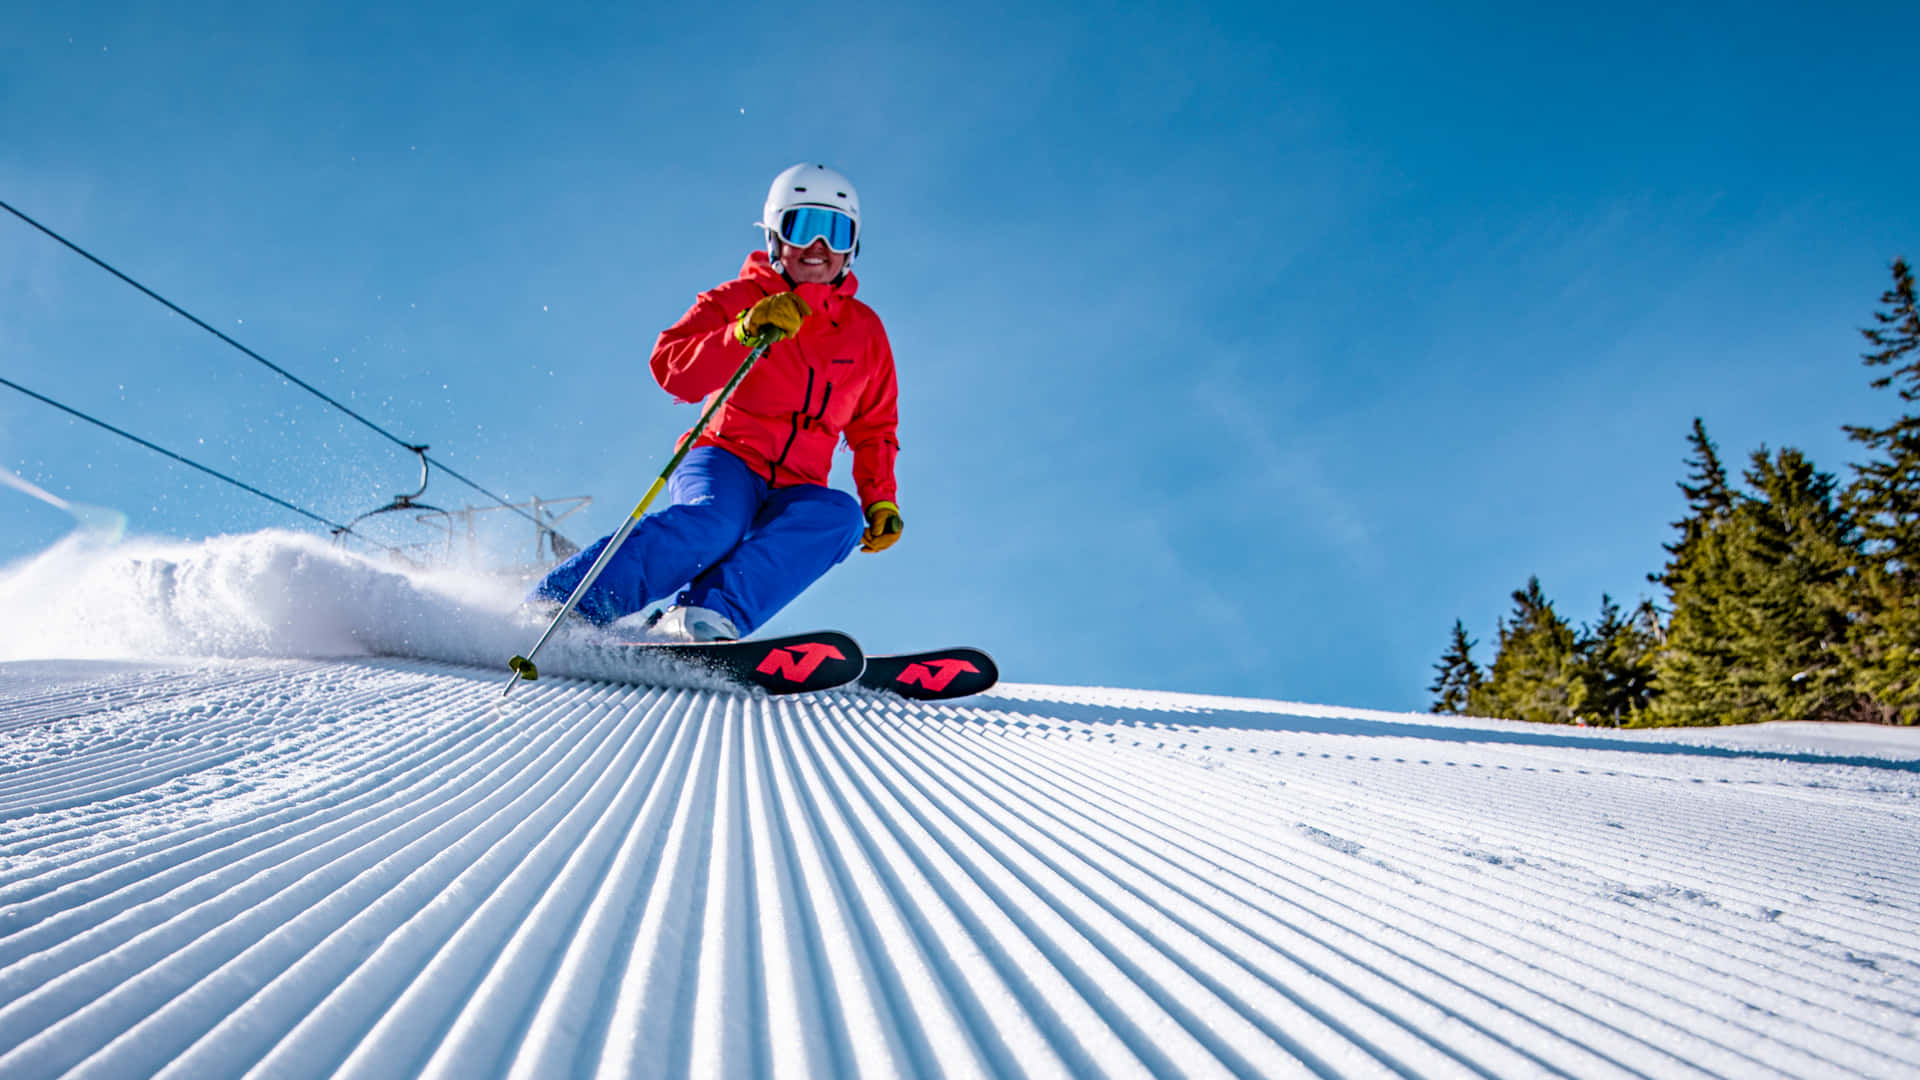 Enjoy the thrill of the mountain with a great ski session